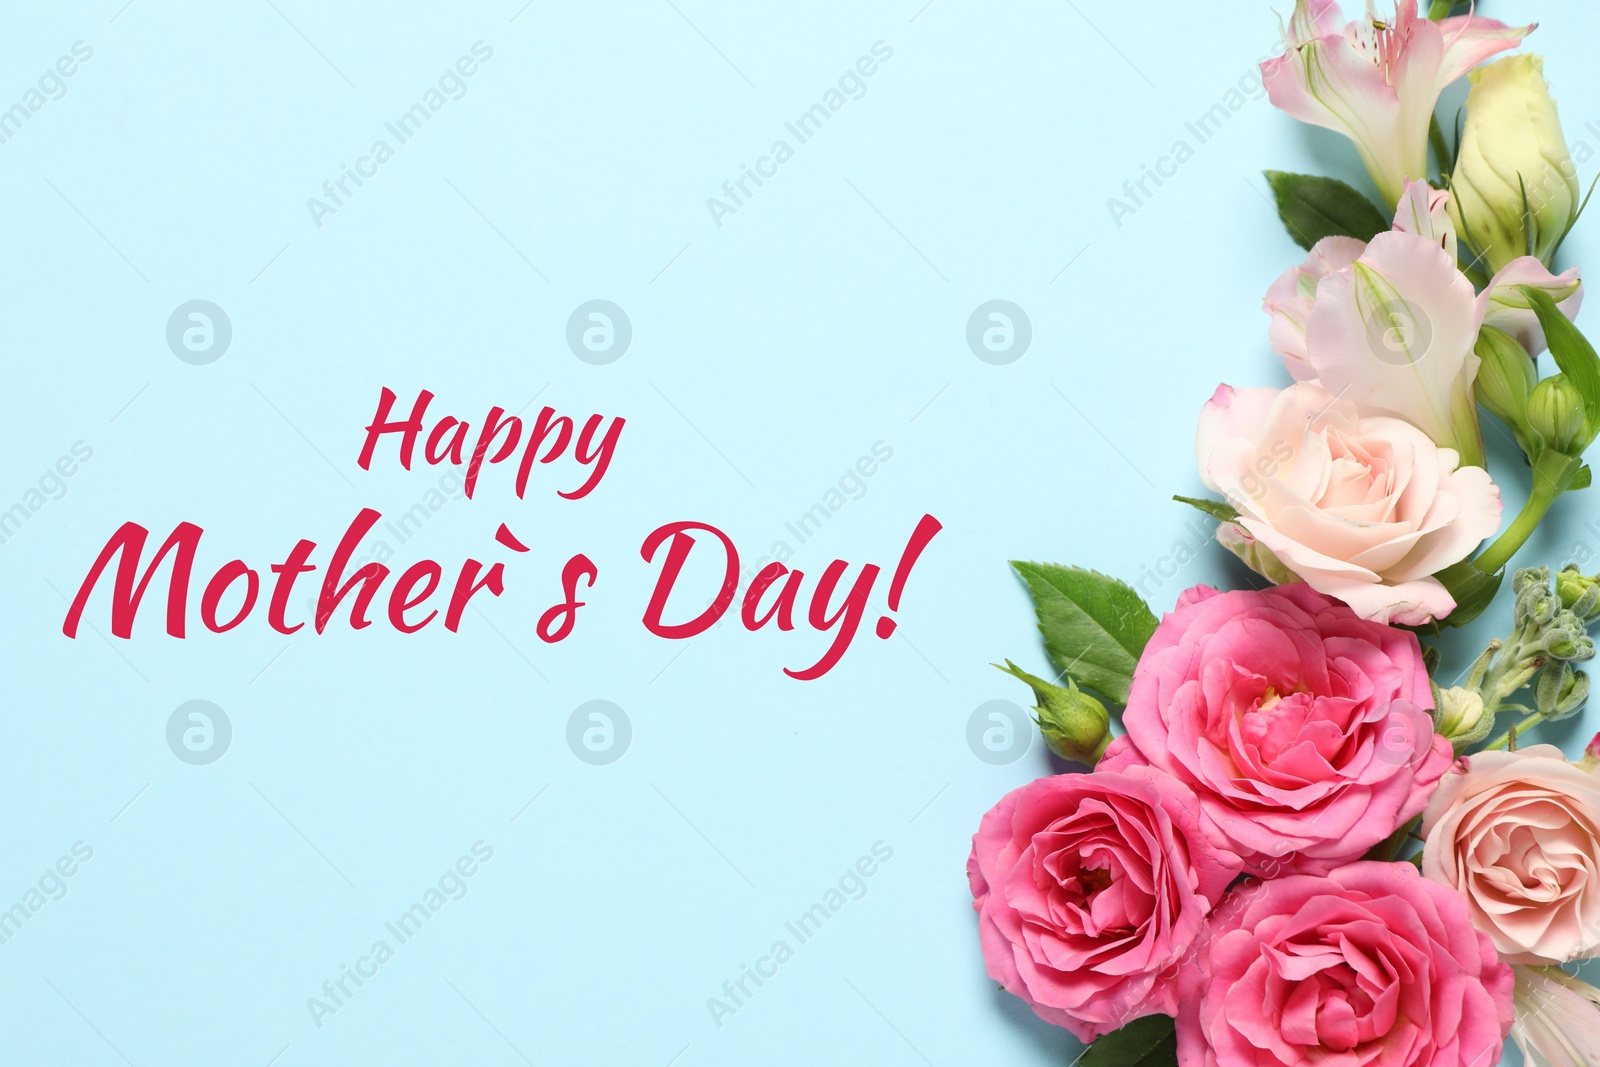 Image of Happy Mother's Day greeting card. Beautiful rose flowers on light blue background